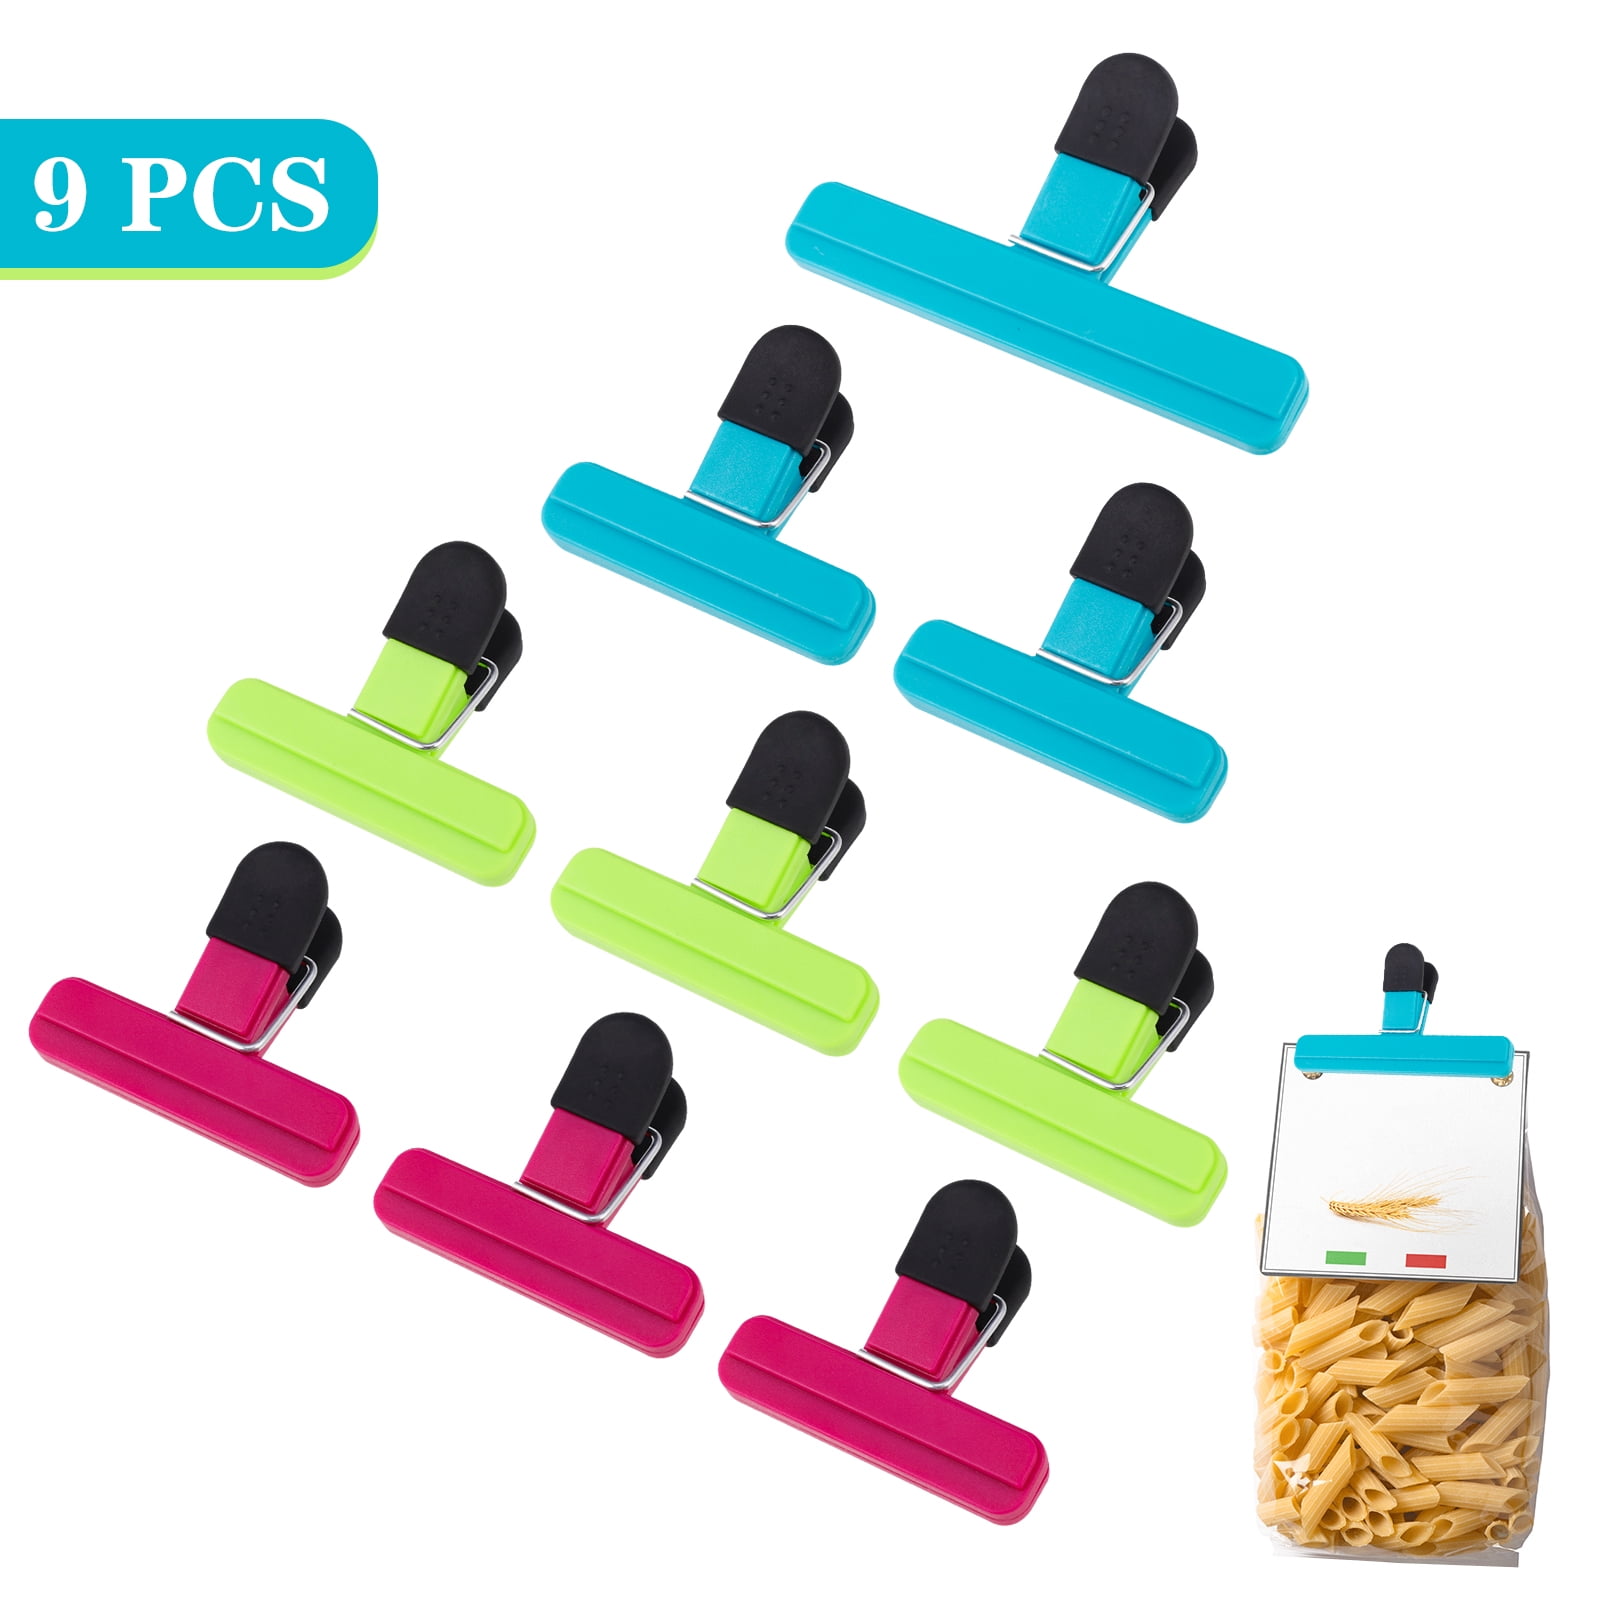 Cute Chip Bag Clips,Chip Clips,Food Clips- Assorted Sizes Food Bag